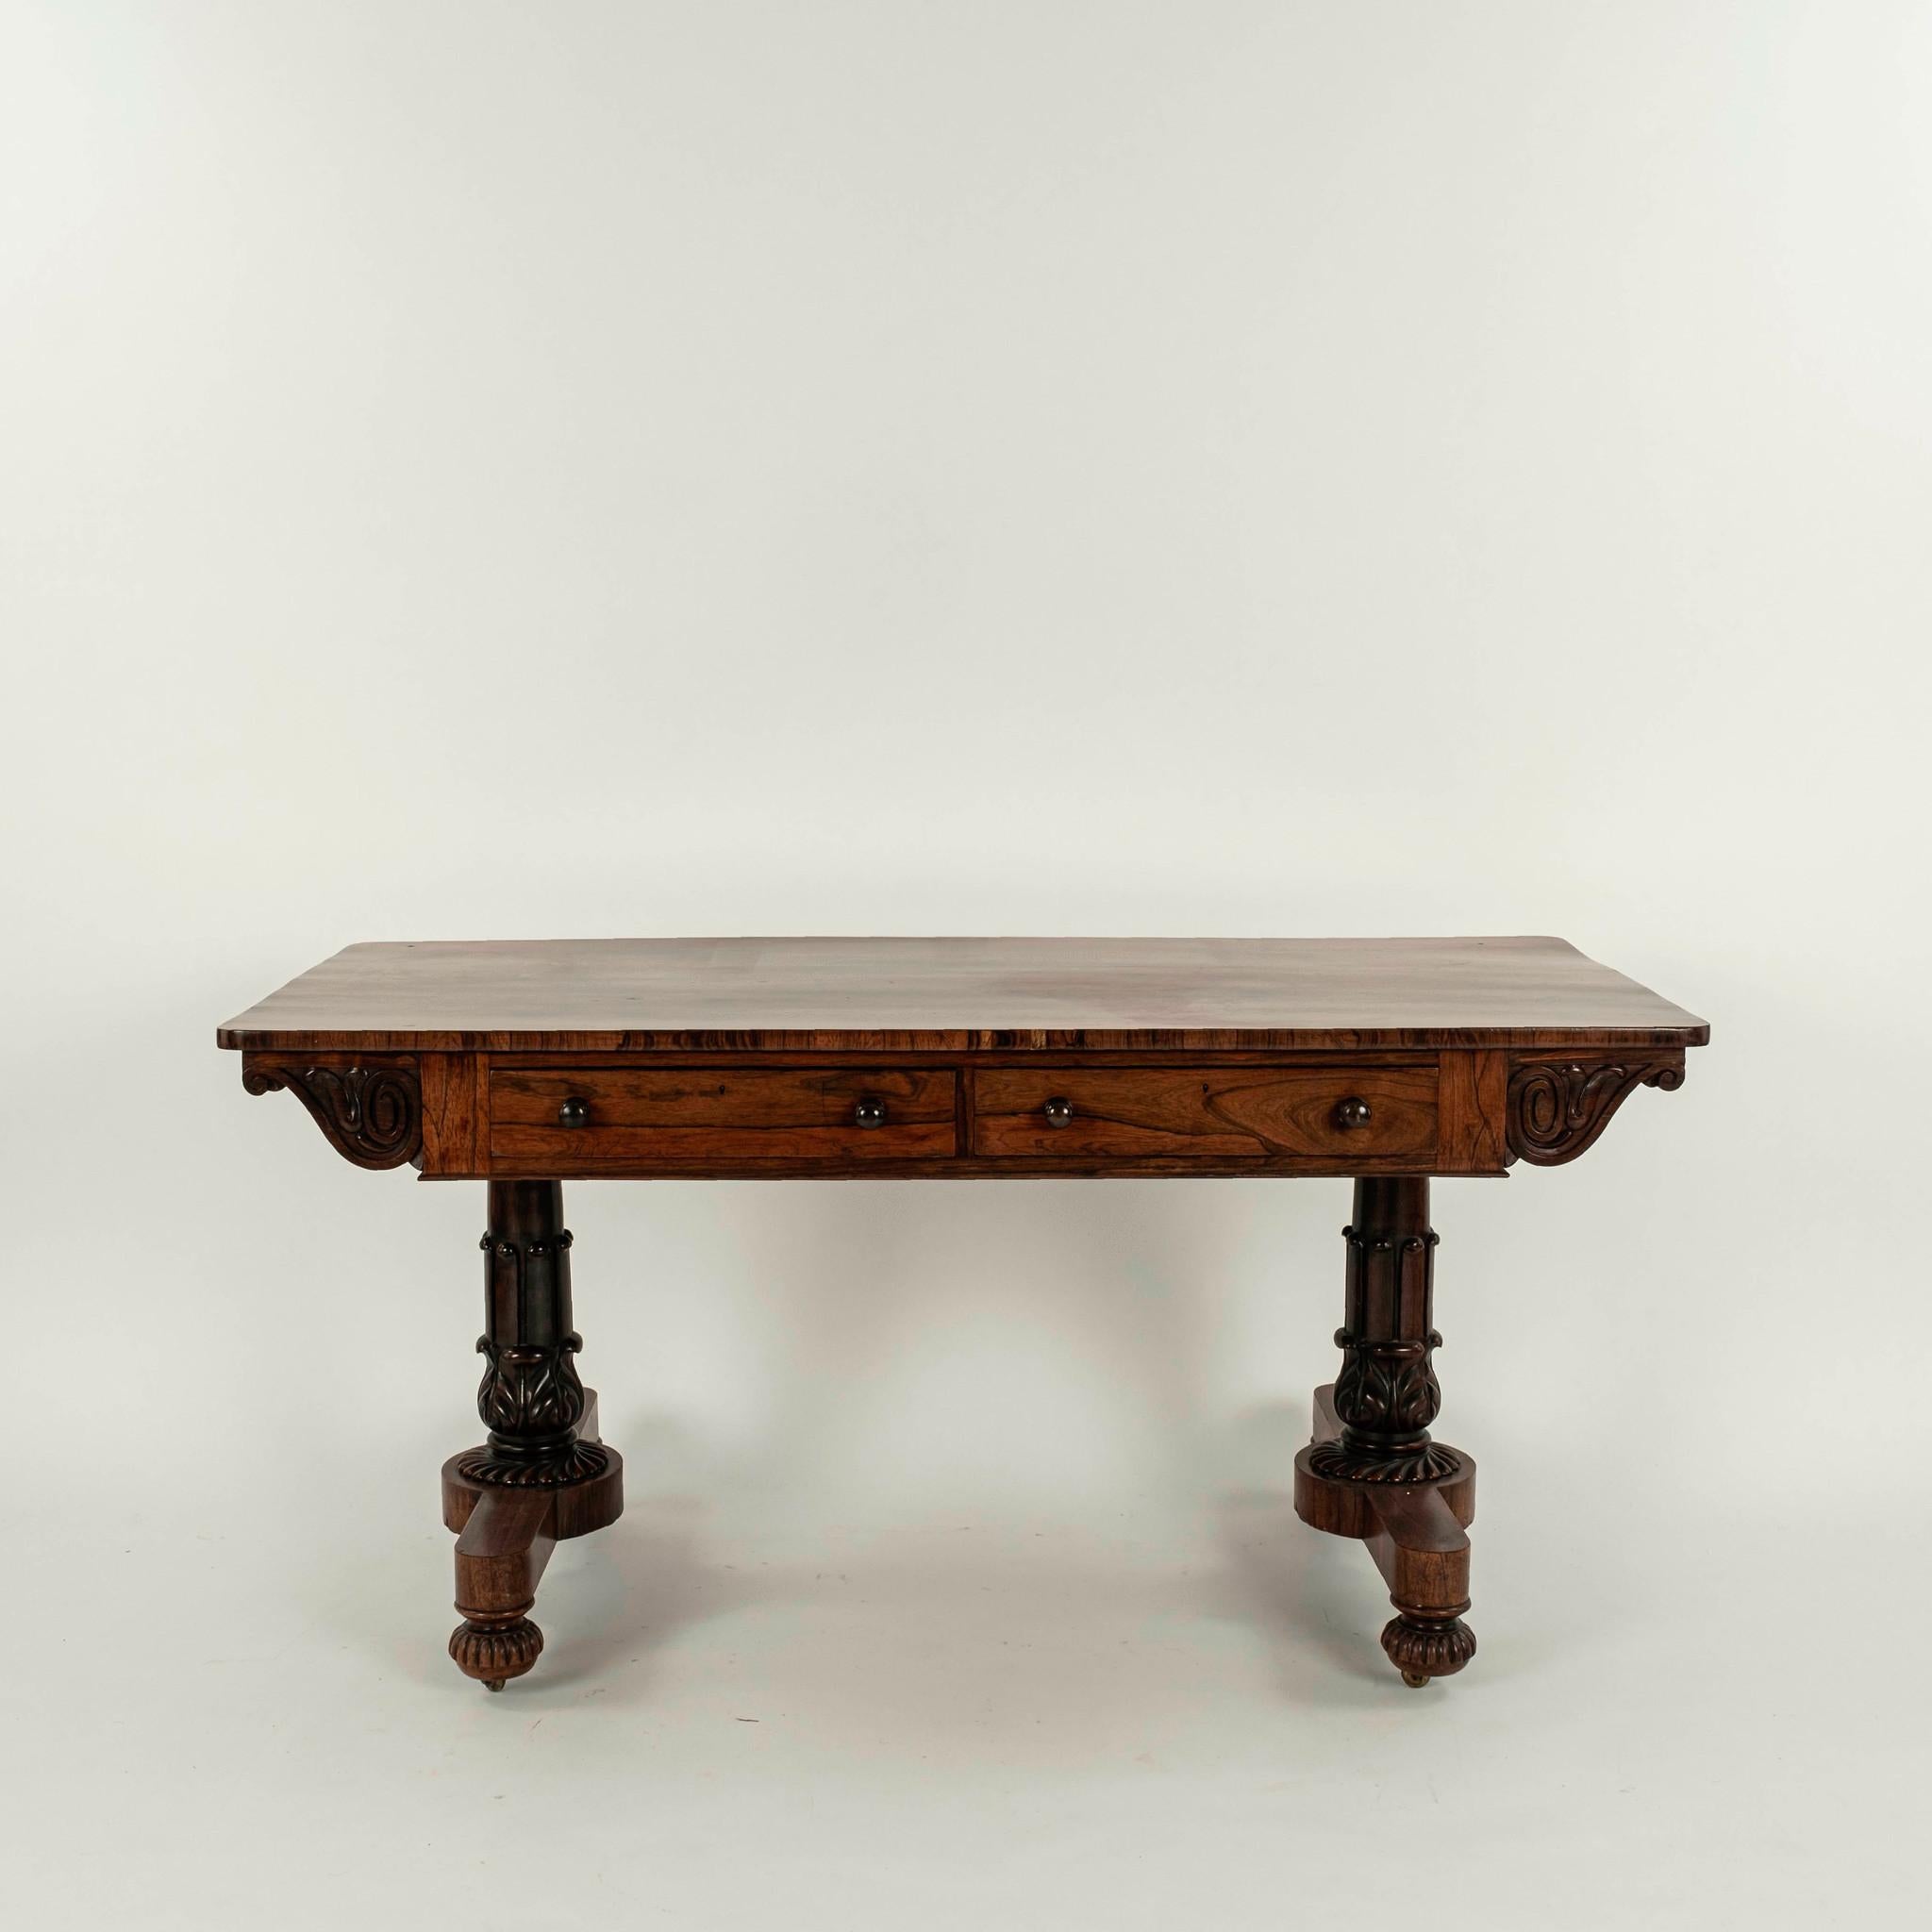 Early 19th century walnut two drawer library table supported by hand carved and turned trestle legs.